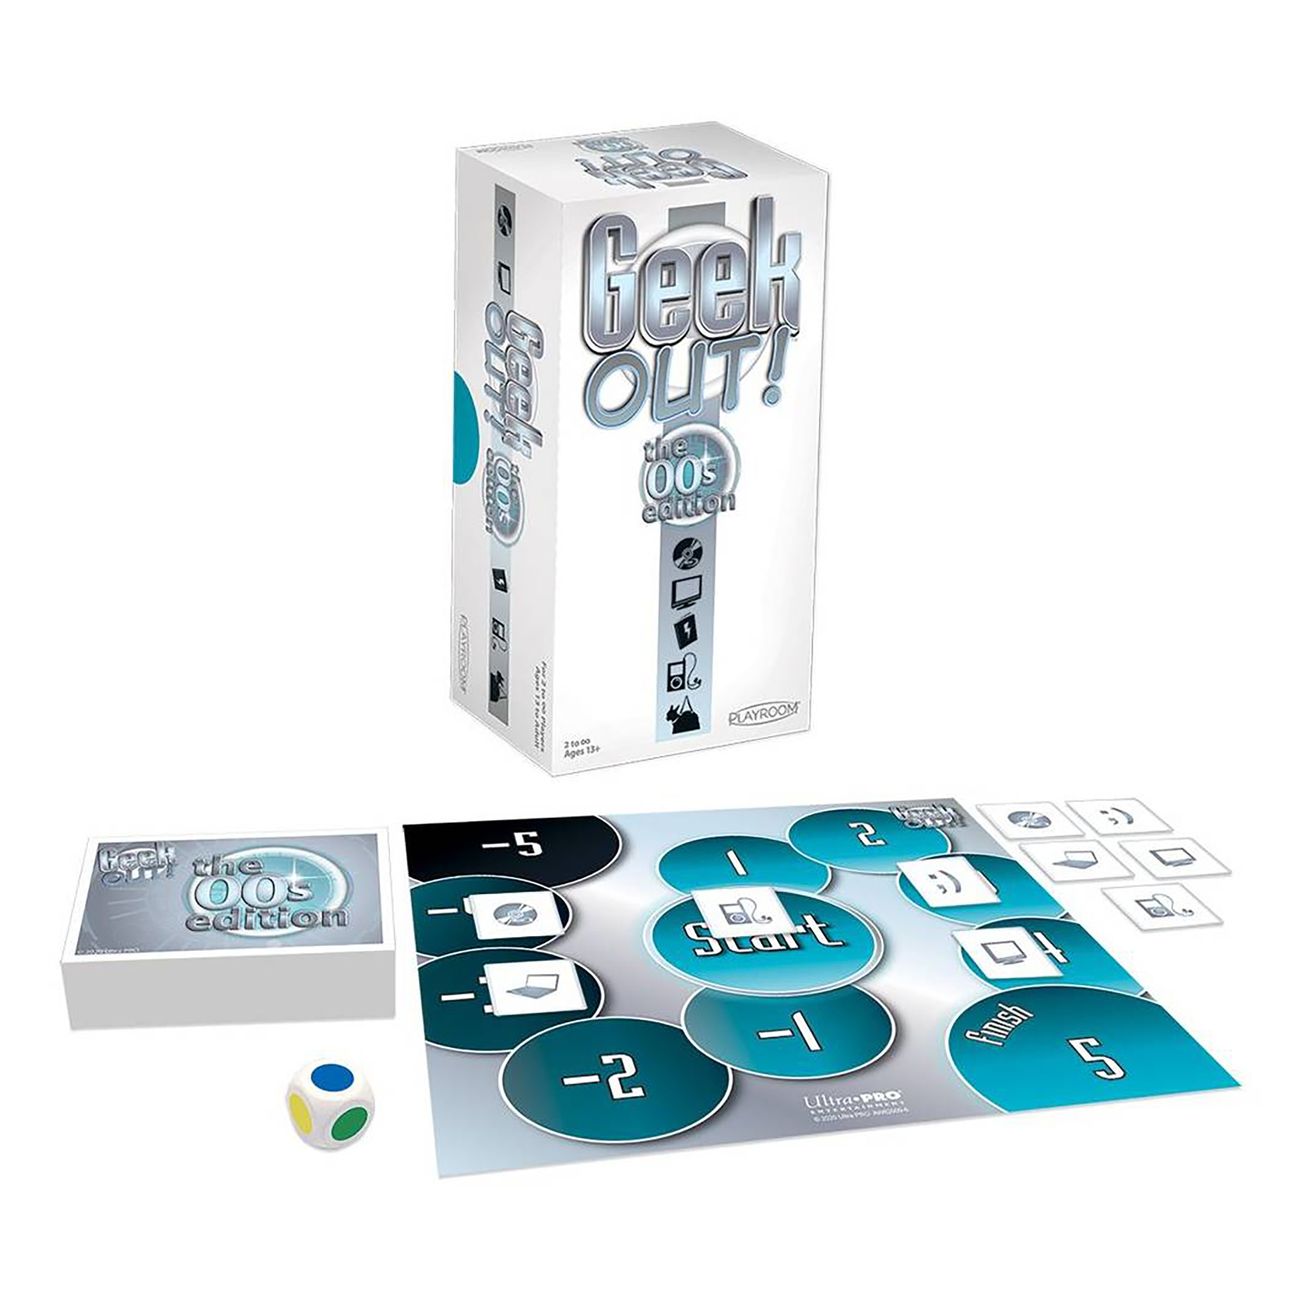 geek-out-00s-edition-spel-90789-2